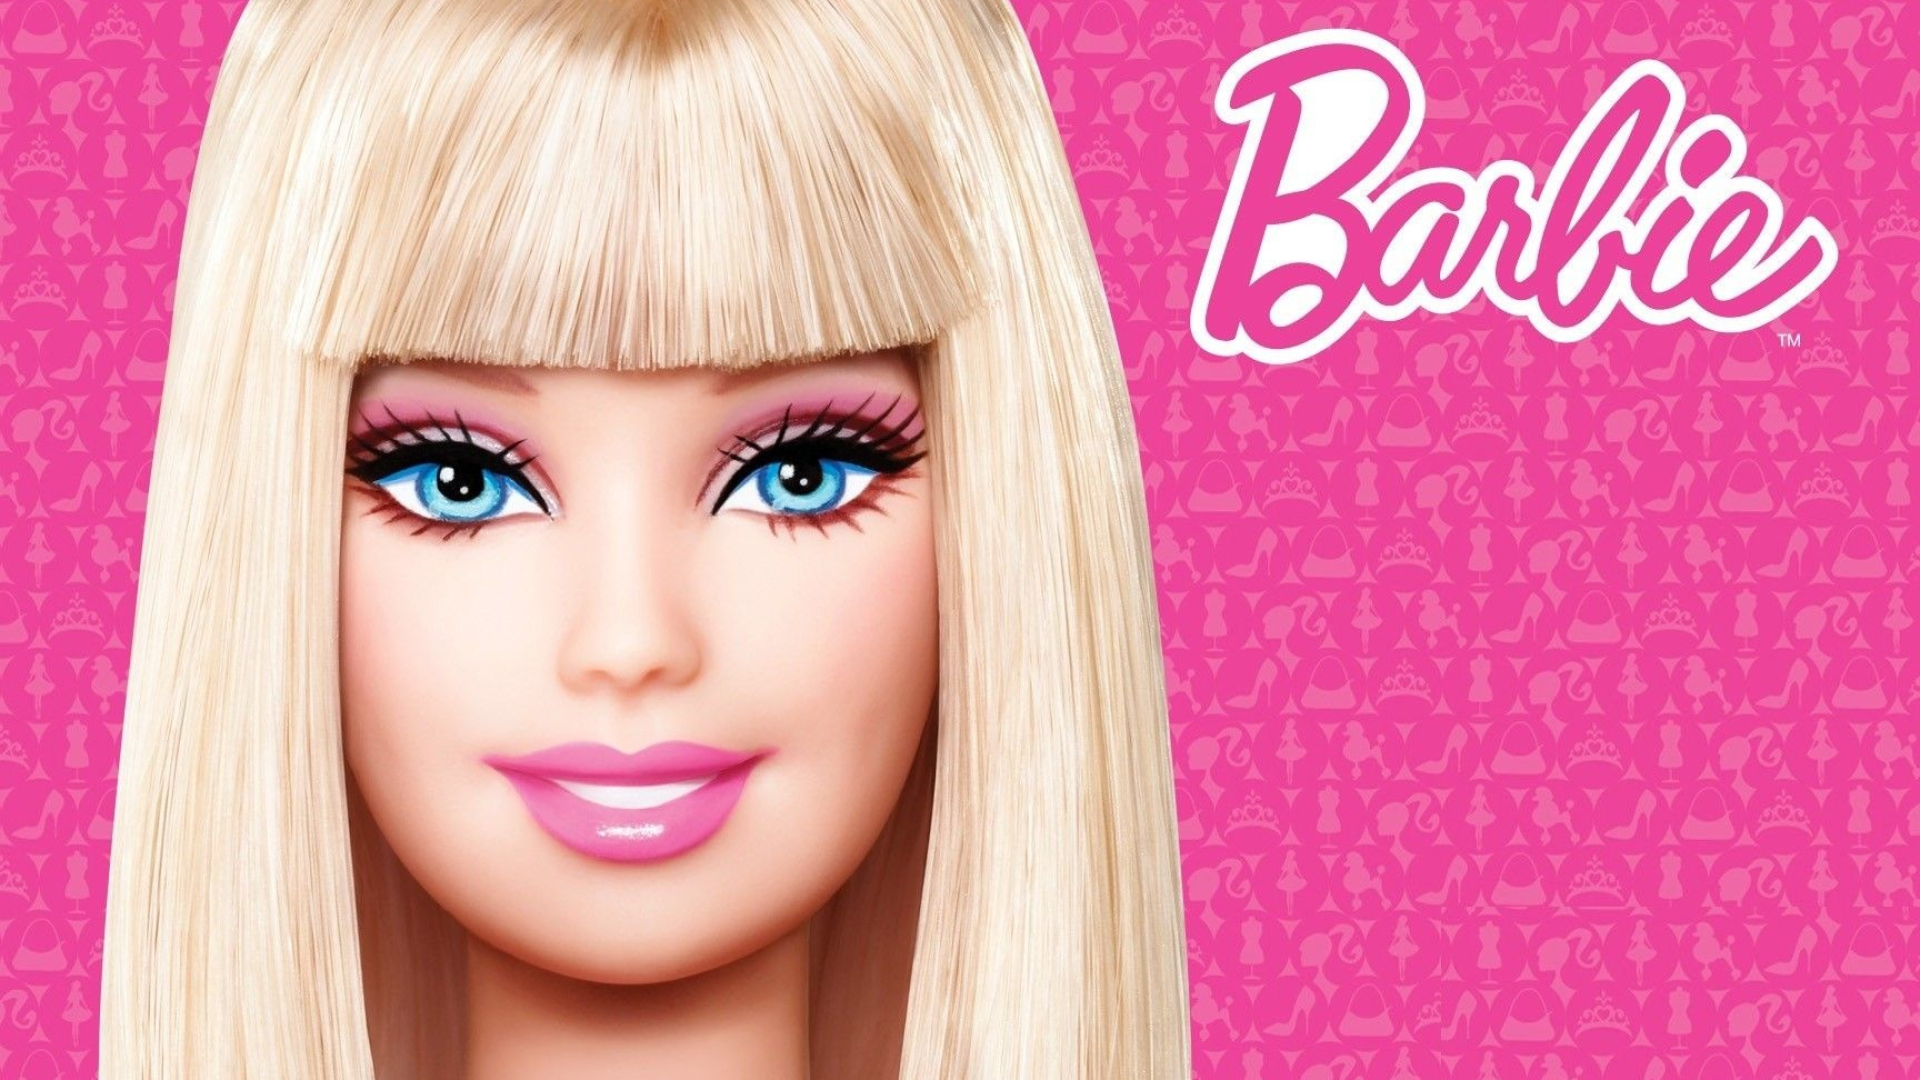 Pink Barbie wallpapers, Cute dolls, Girly vibes, Barbie fashion style, 1920x1080 Full HD Desktop